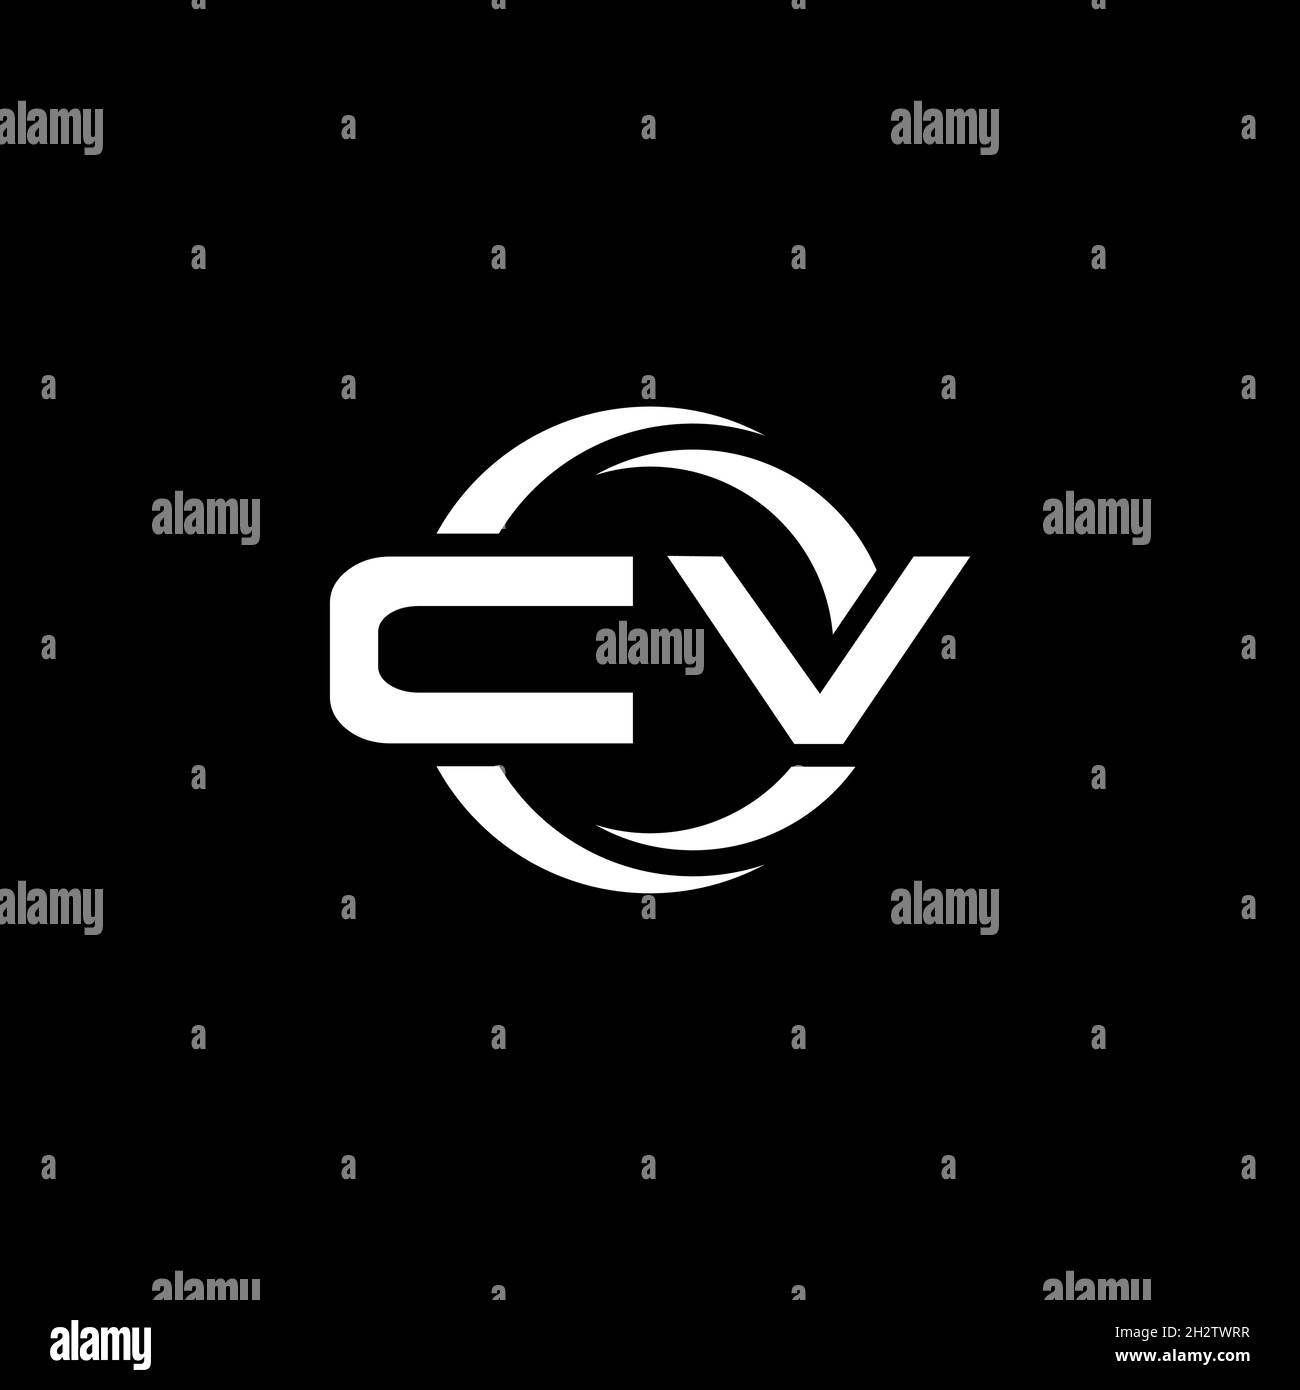 CV Monogram logo letter with simple shape and circle rounded design template isolated on black background Stock Vector